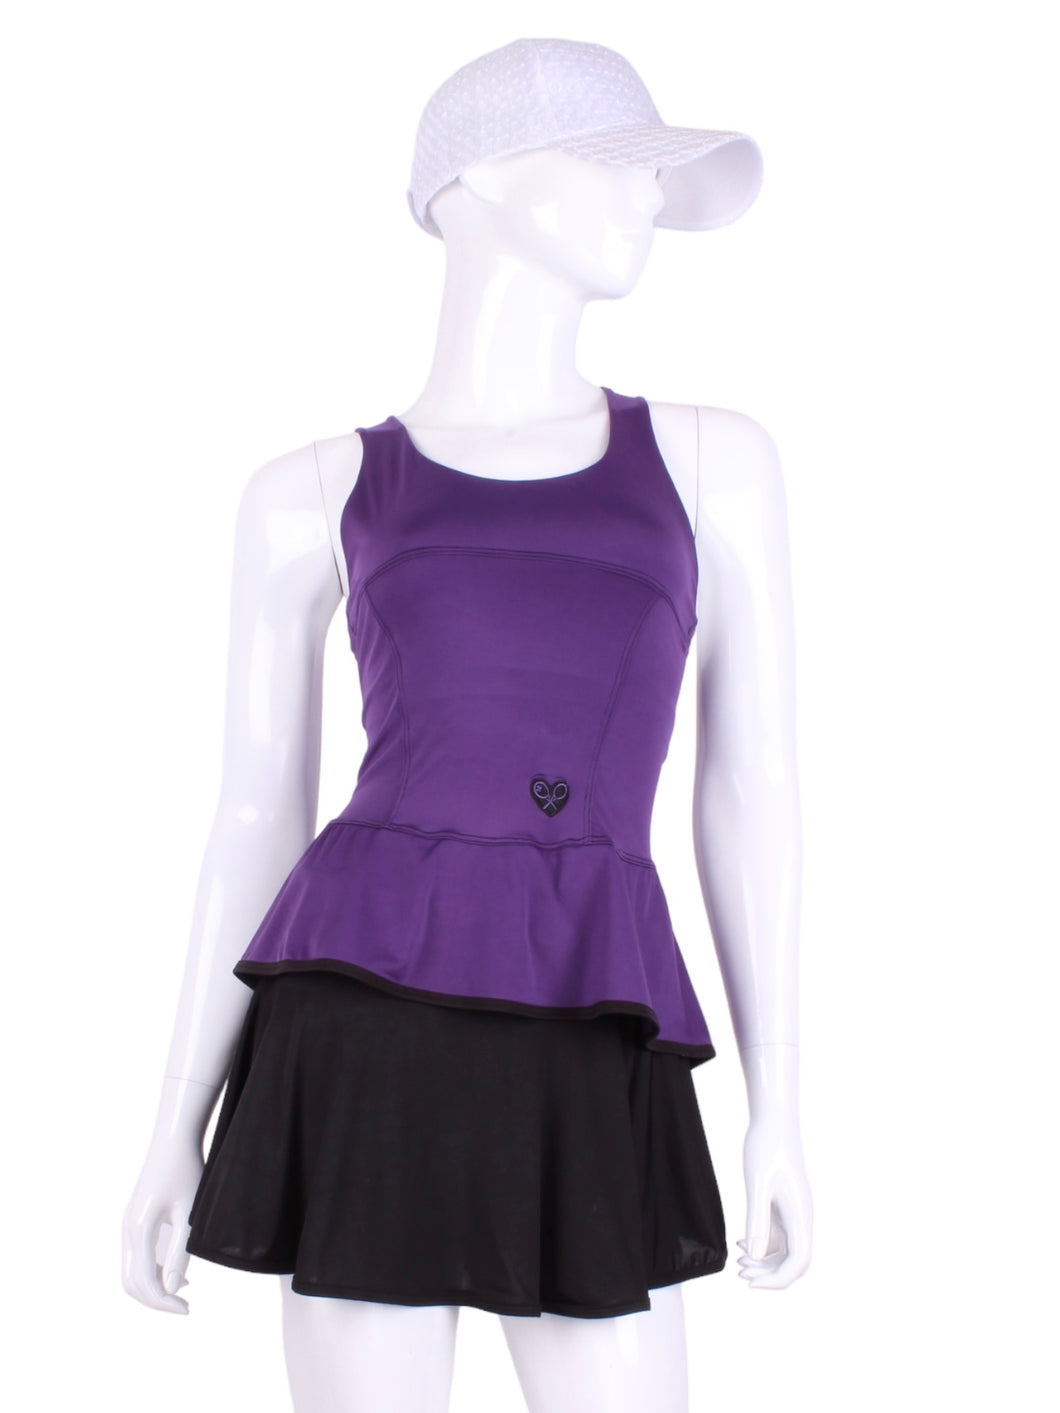 Ruffle Tank Tennis Top Purple. An elegant tennis ruffle top - silky soft - light - and quick-drying breathable fabric.   Scoop neckline front and crossed back with two-needle cover stitch at each seam.   Smooth binding finishes the edges with class.  The most comfortable and feminine tennis top.  These pieces run small for a more petite woman - under 5’8” - for the medium max 34 D